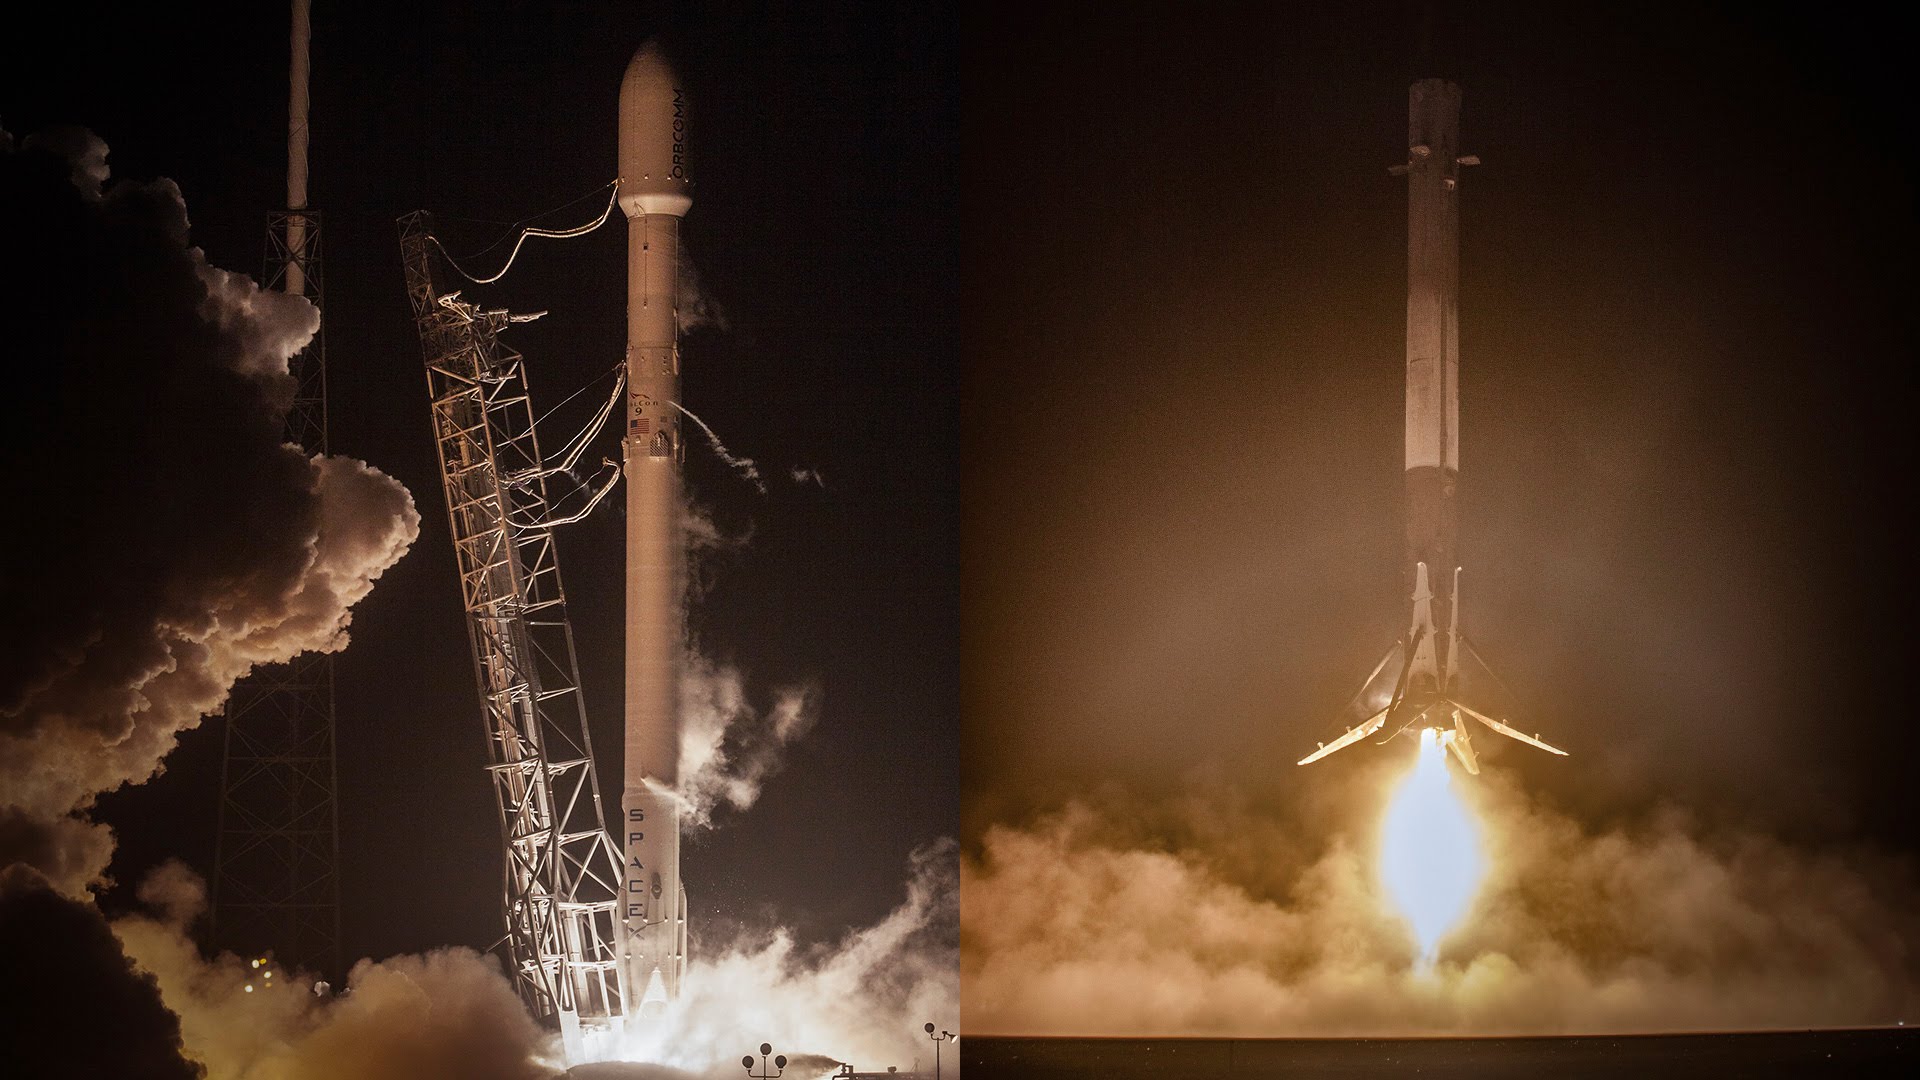 Recycled Falcon 9 rocket survives one of SpaceX's most challenging landings yet